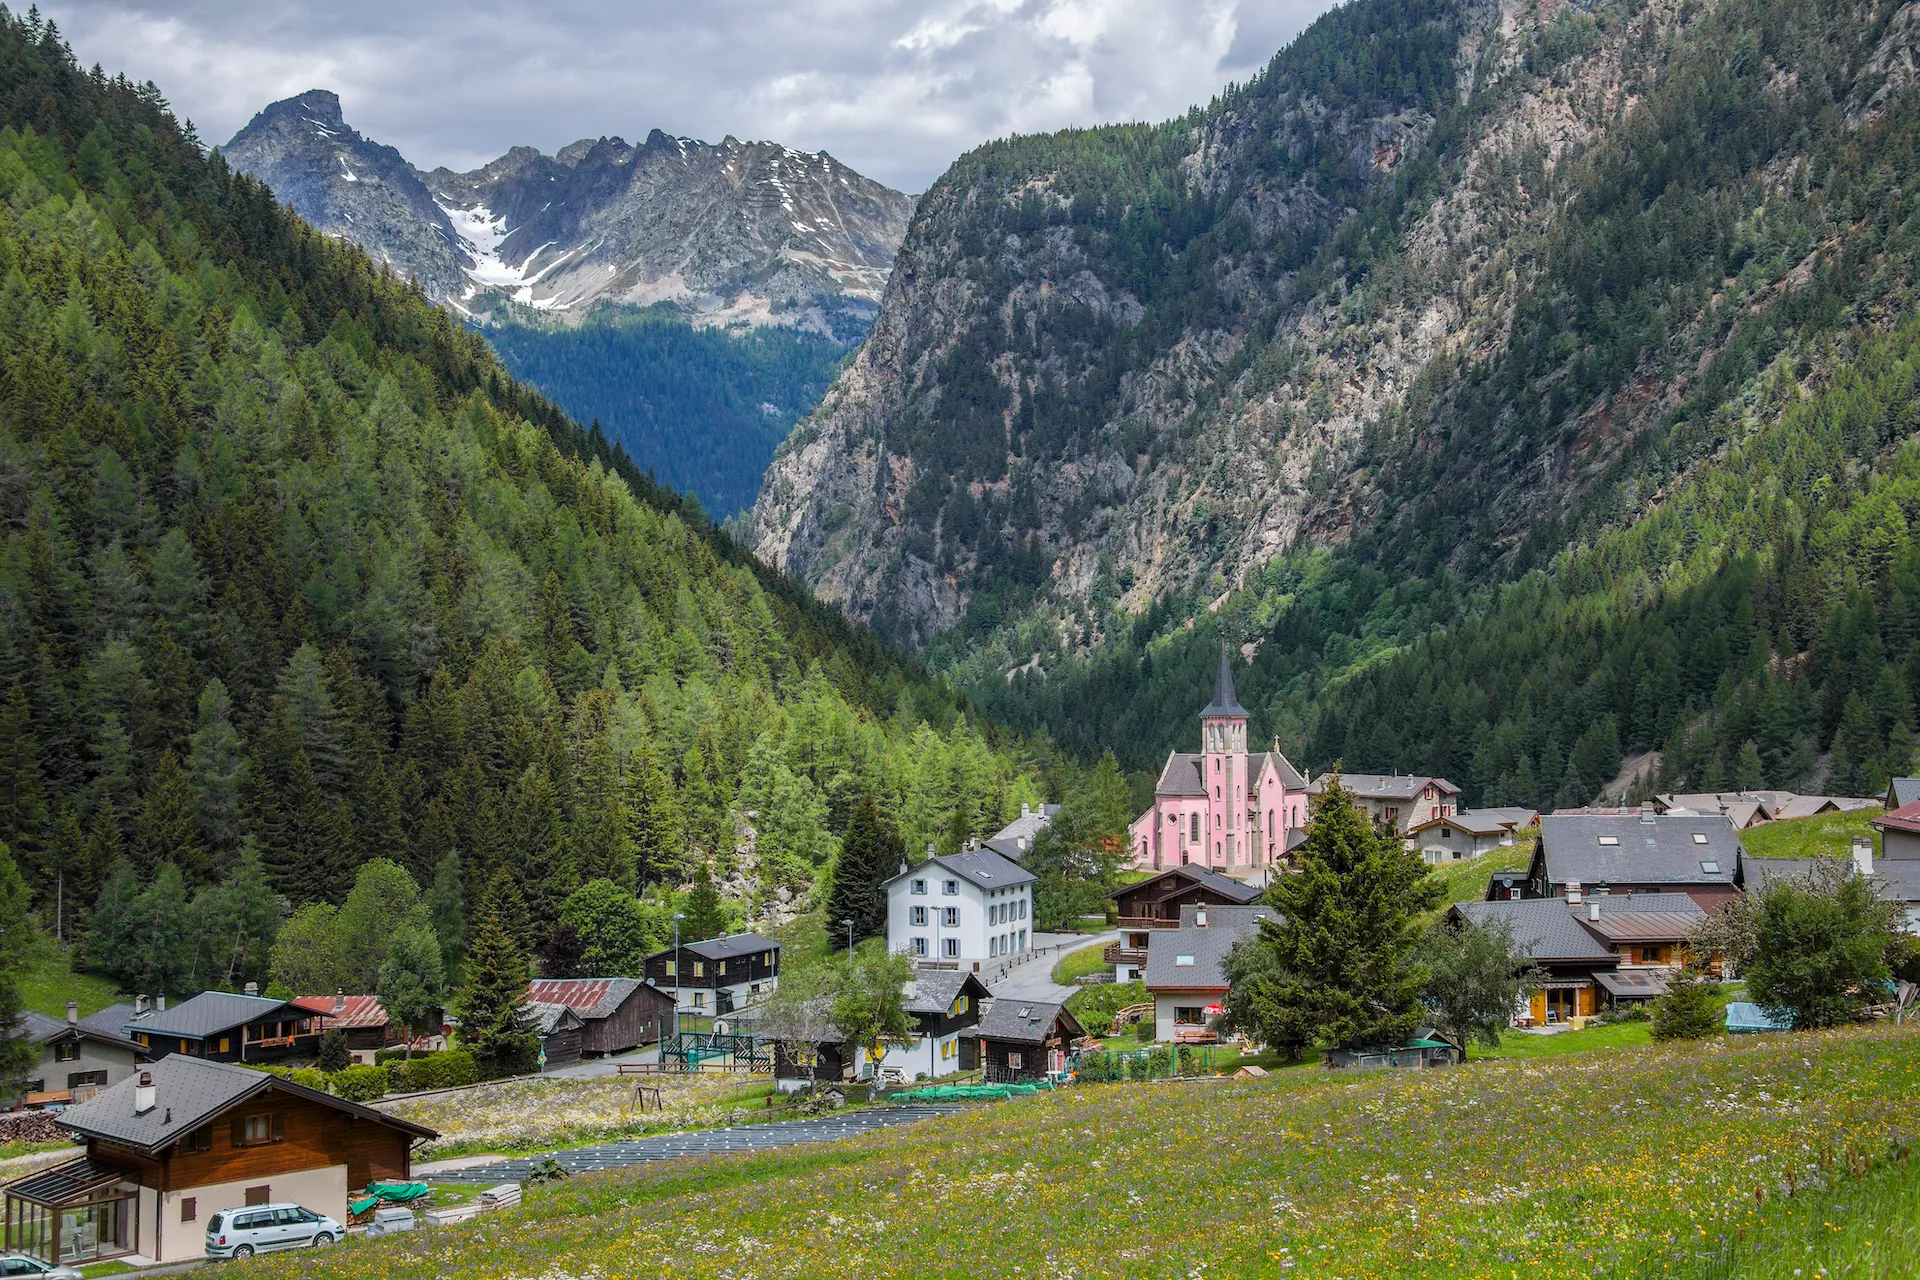 The alpine village of Trient in the canton of Valais